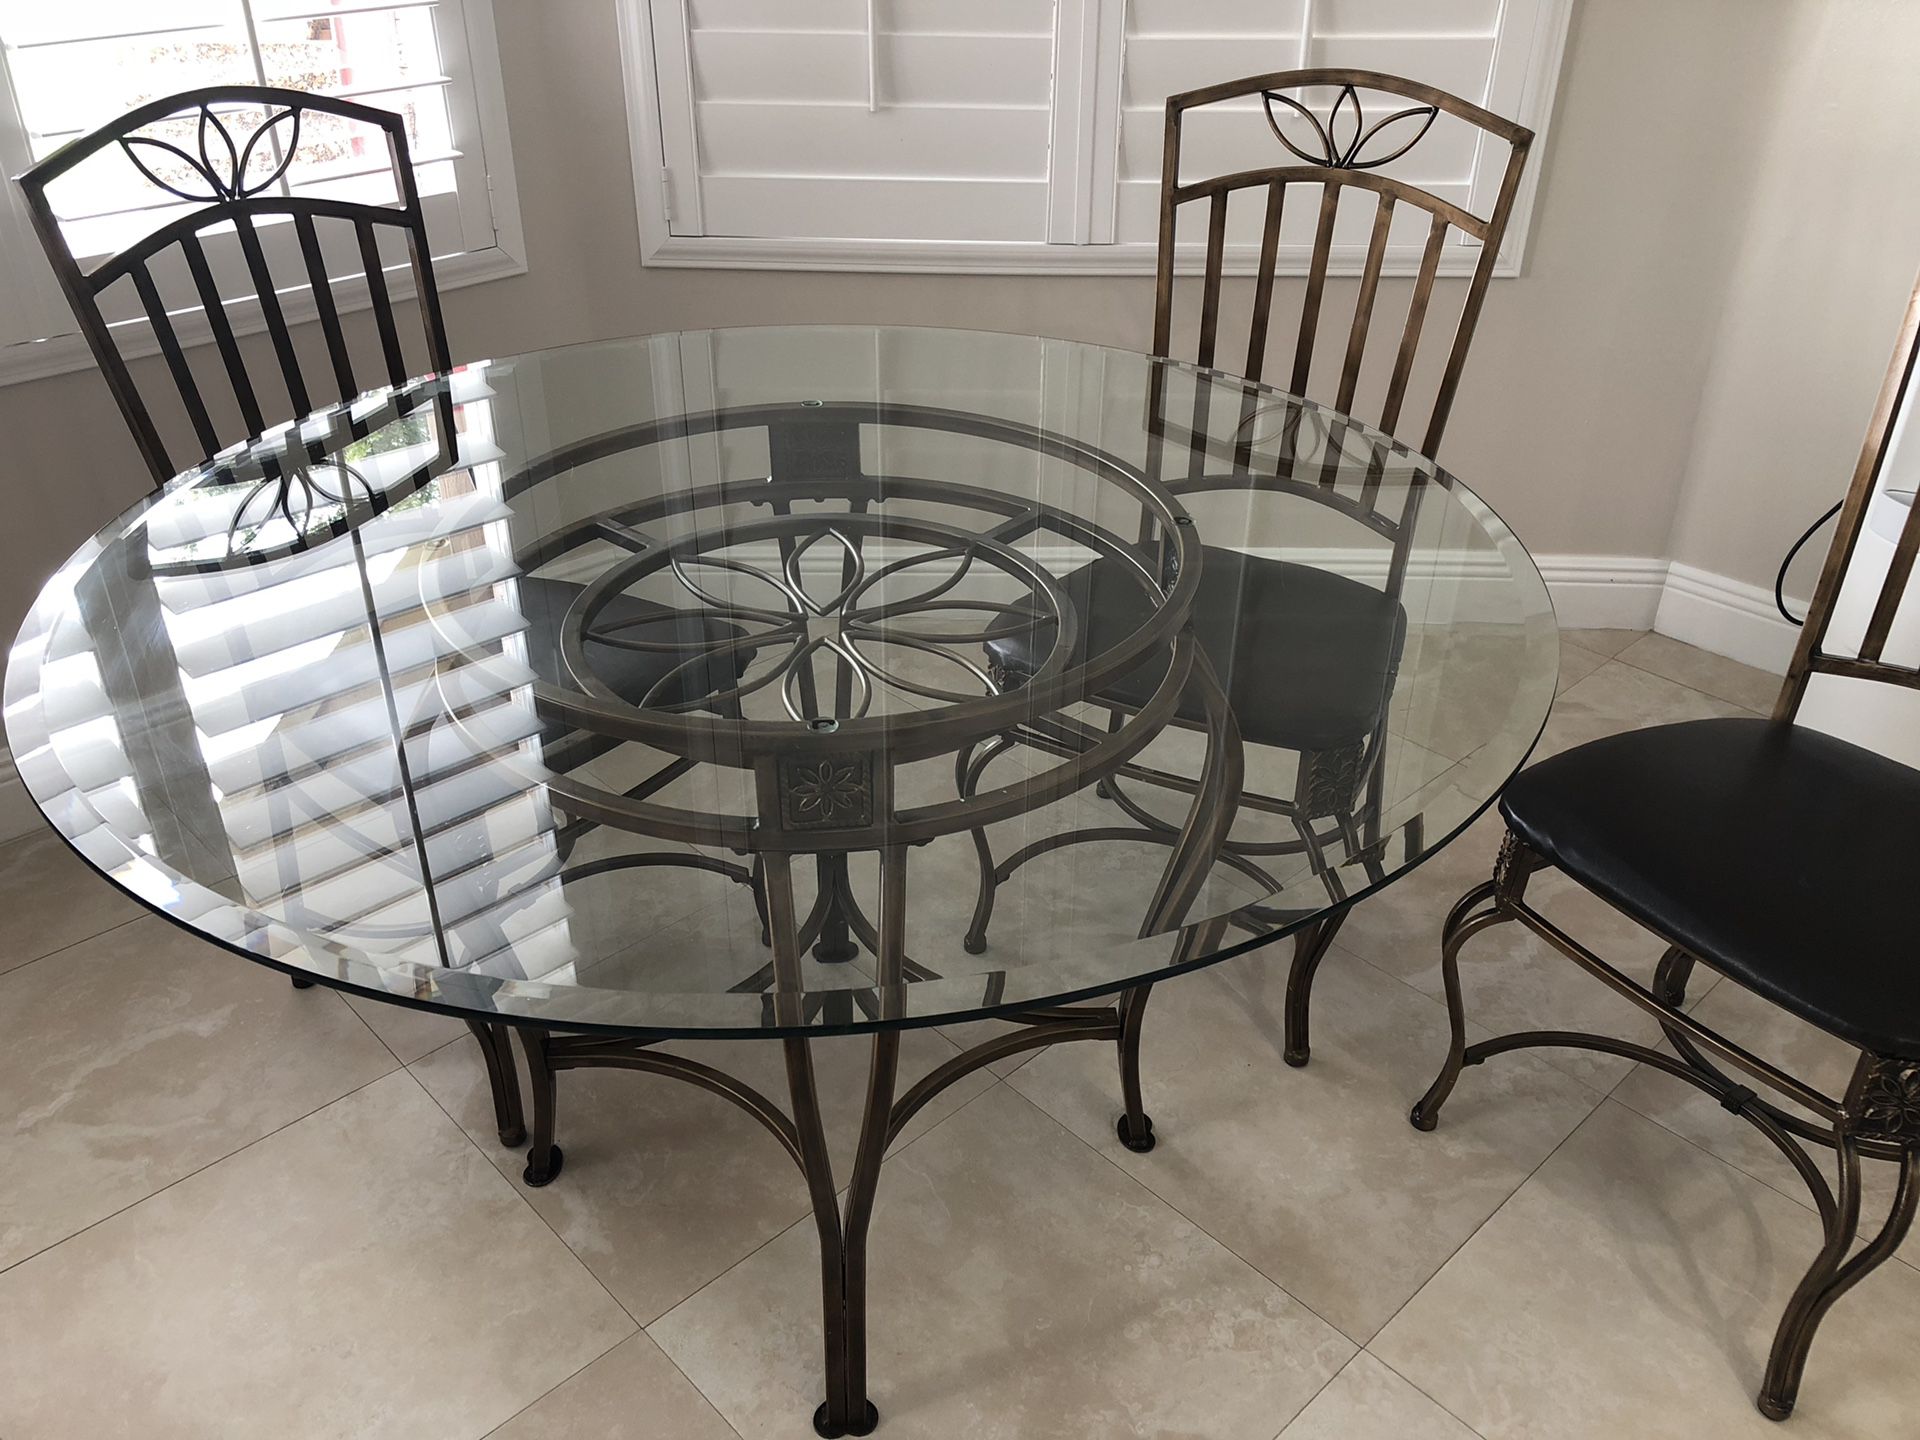 Glass and iron table